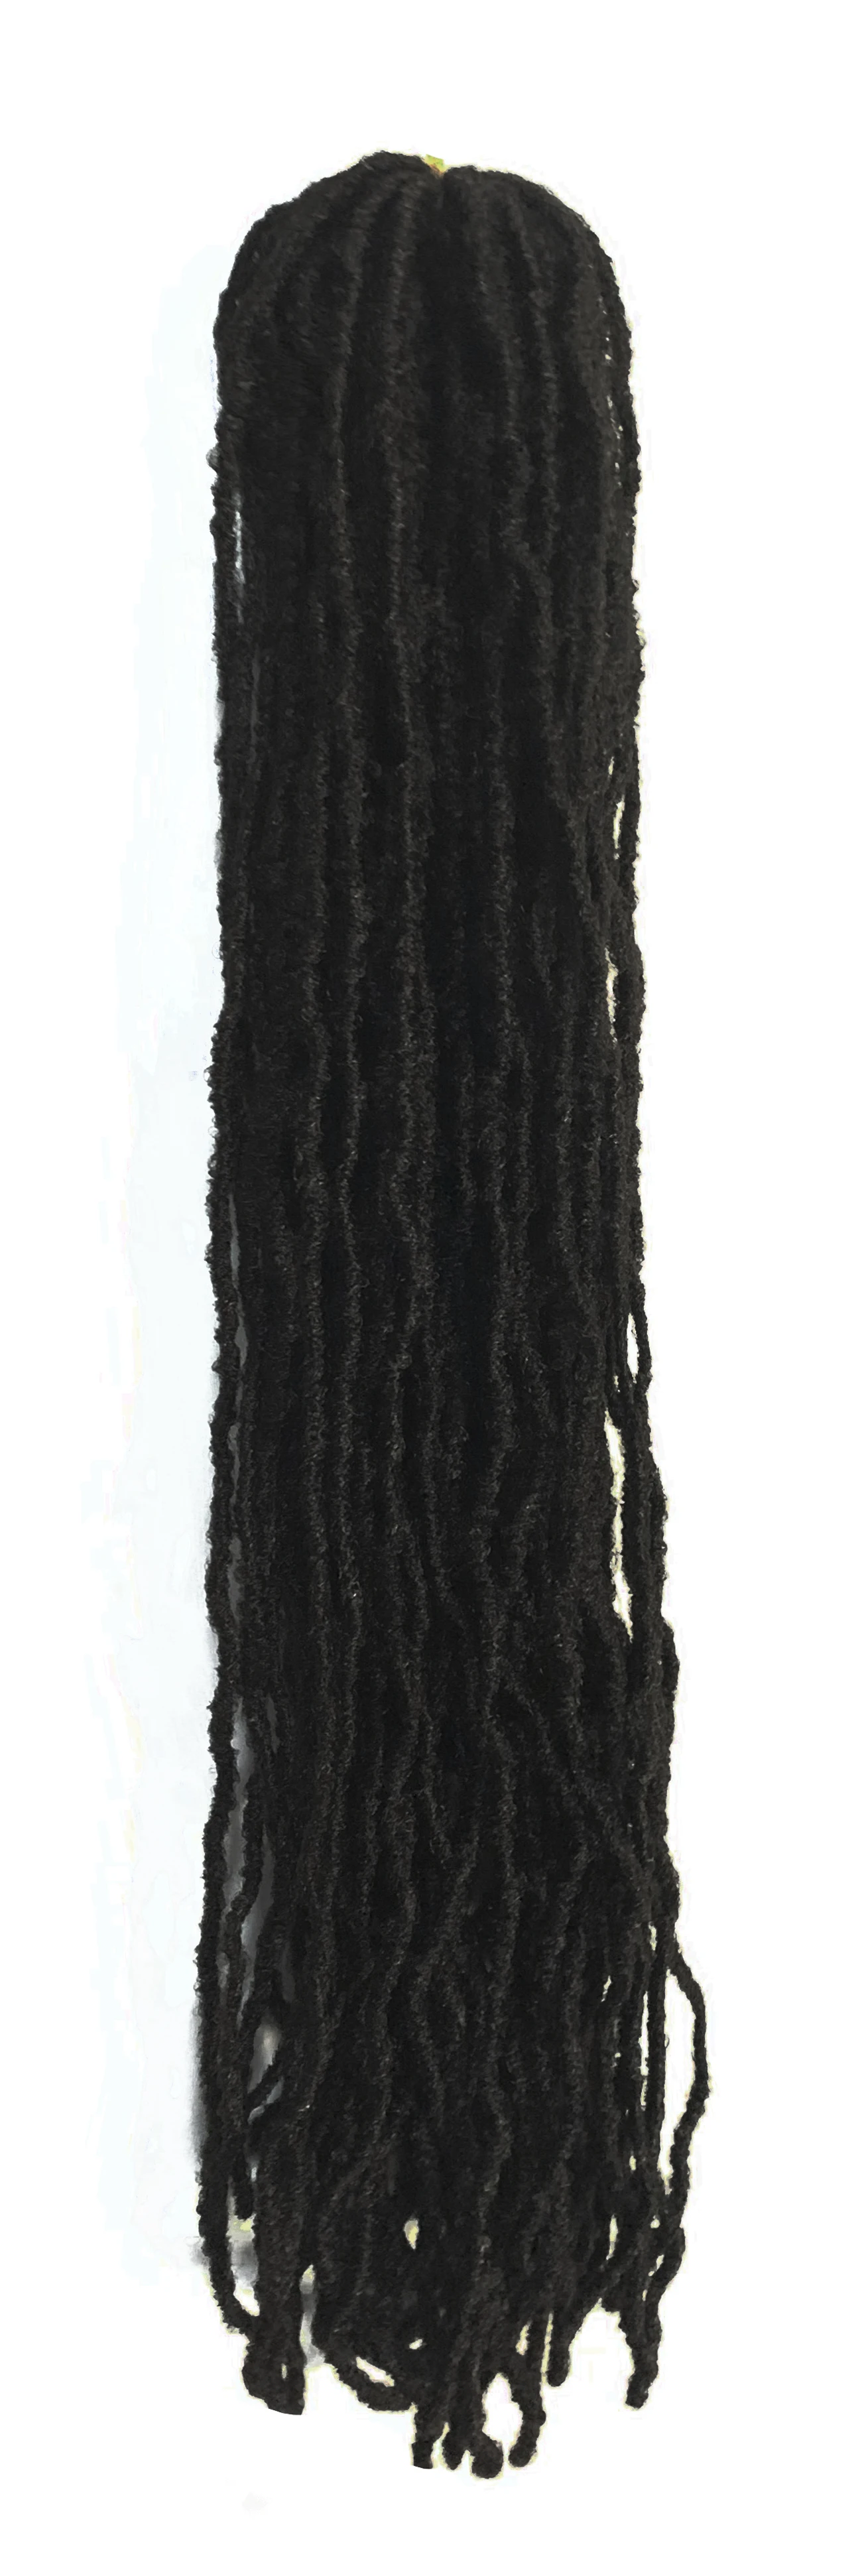 Buy Afro Dreadlocks Sister Locks Braid Hair Extension Brown Ombre Crochet  Braids 80 Strands 20 Inch Reggae Synthetic Hair For Women from Henan  Rebecca Hair Products Co., Ltd., China